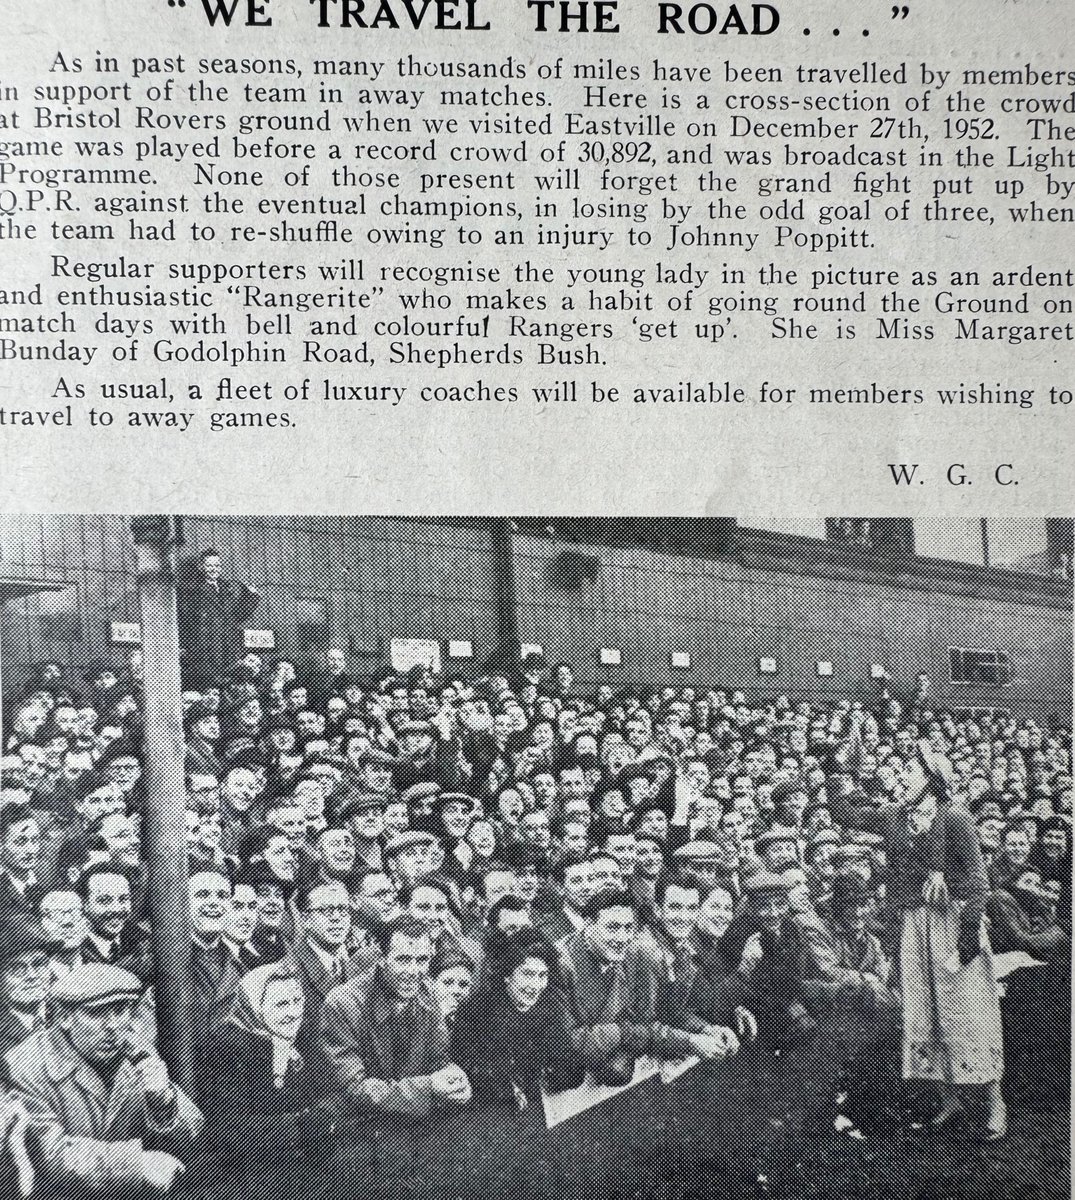 1952: #QPR Supporters at #BristolRovers